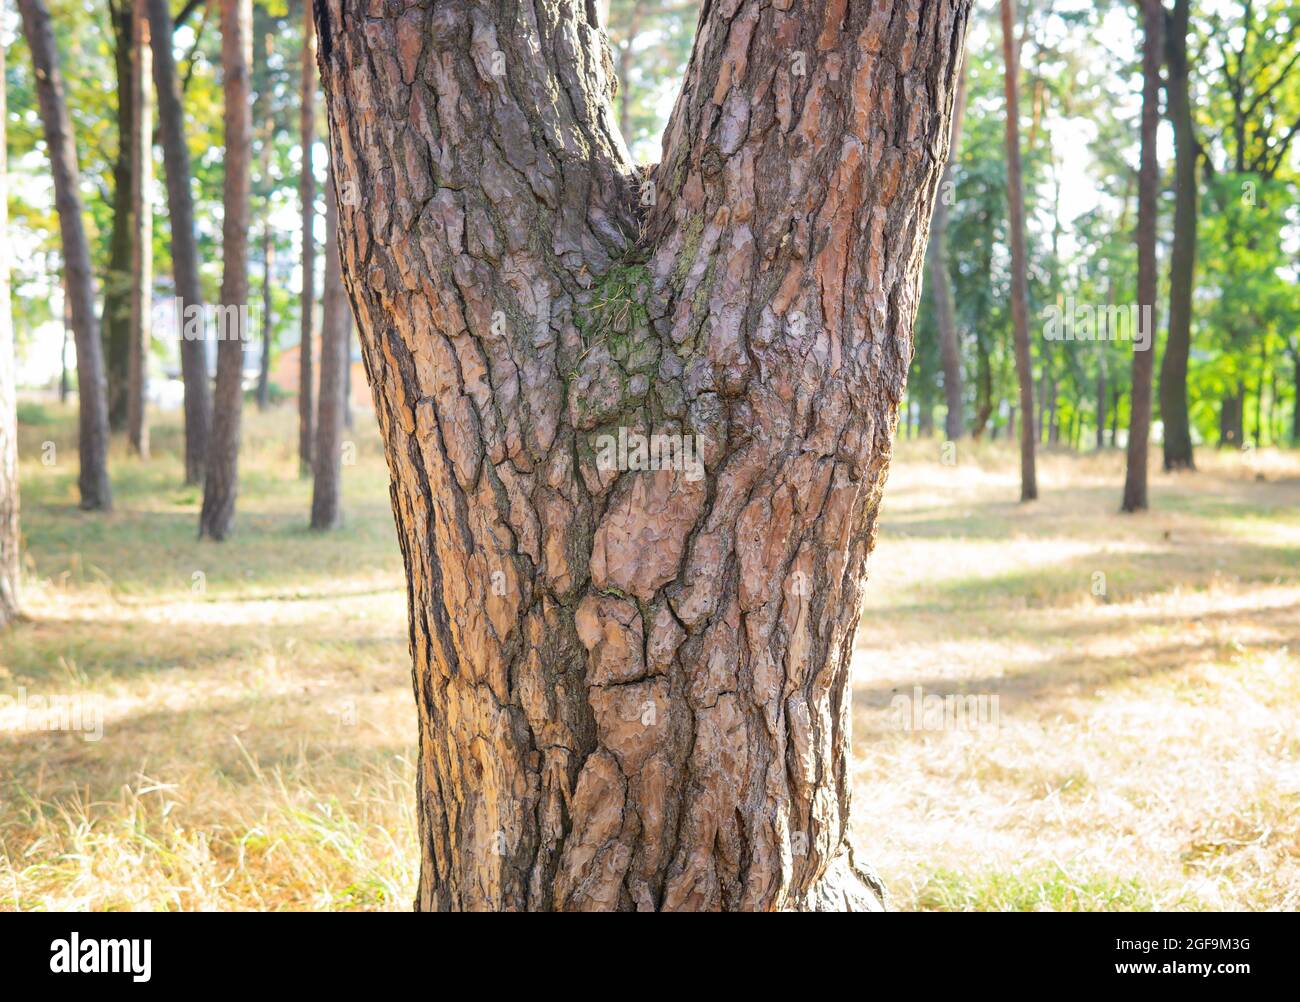 Human face-like pattern on a tree trunk in the woods Stock Photo